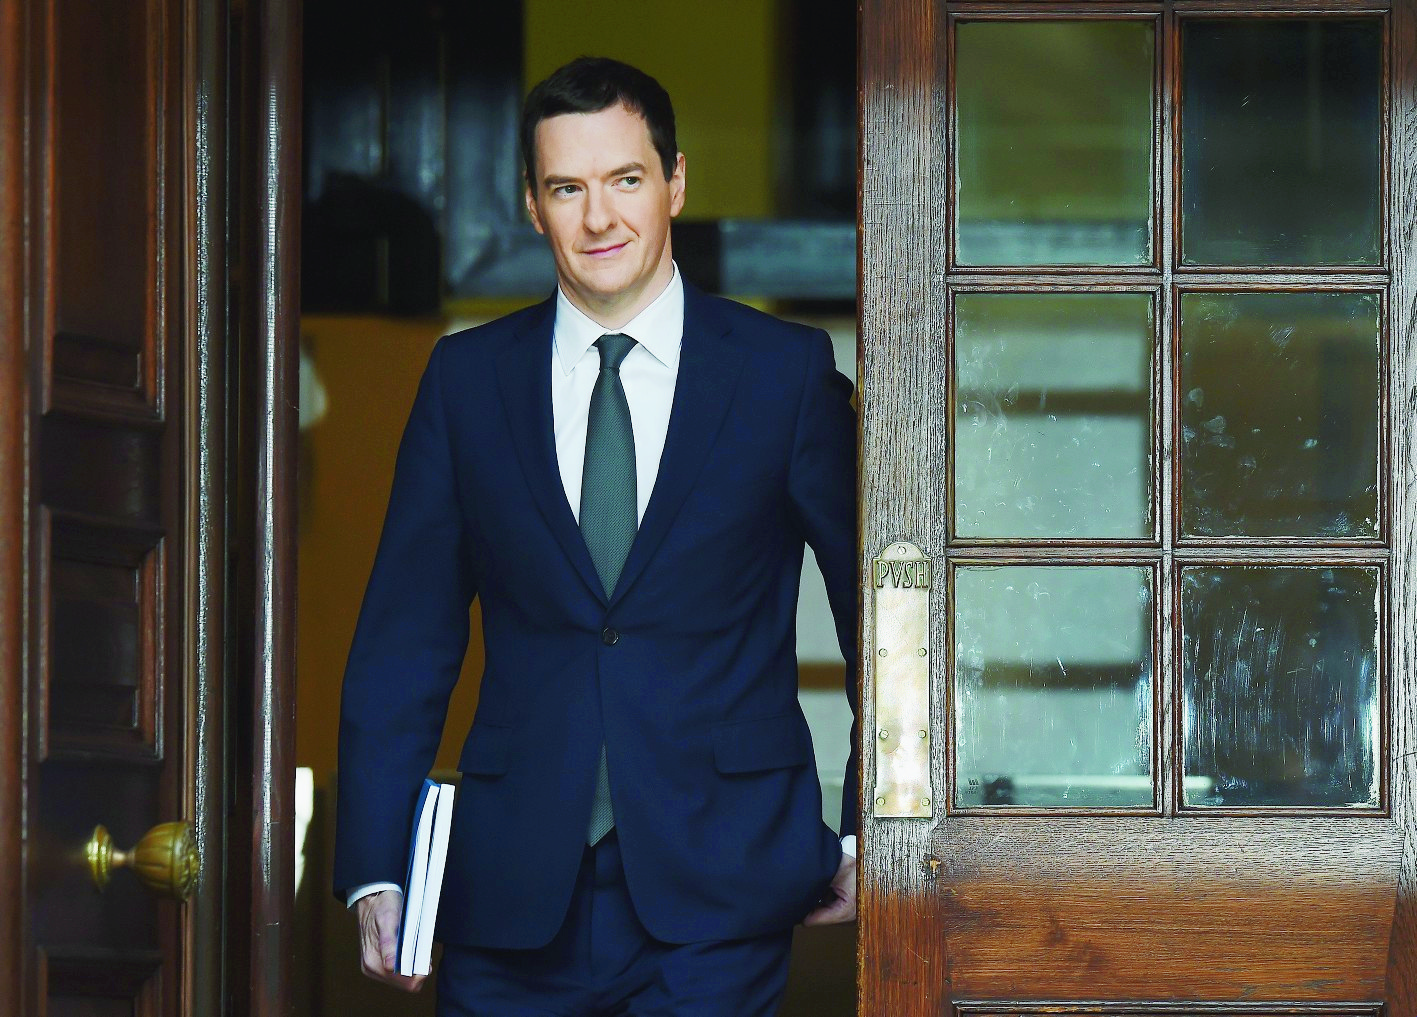 epa05040879 British Chancellor George Osborne departs the Treasury with his Spending Review in London, Britain, 25 November 2015.  Osborne is set to announce his Spending Review that will put in place spending limits on governmental departments for the next five years and set out details of the government's deficit reduction plans.  EPA/ANDY RAIN BRITAIN SPENDING REVIEW